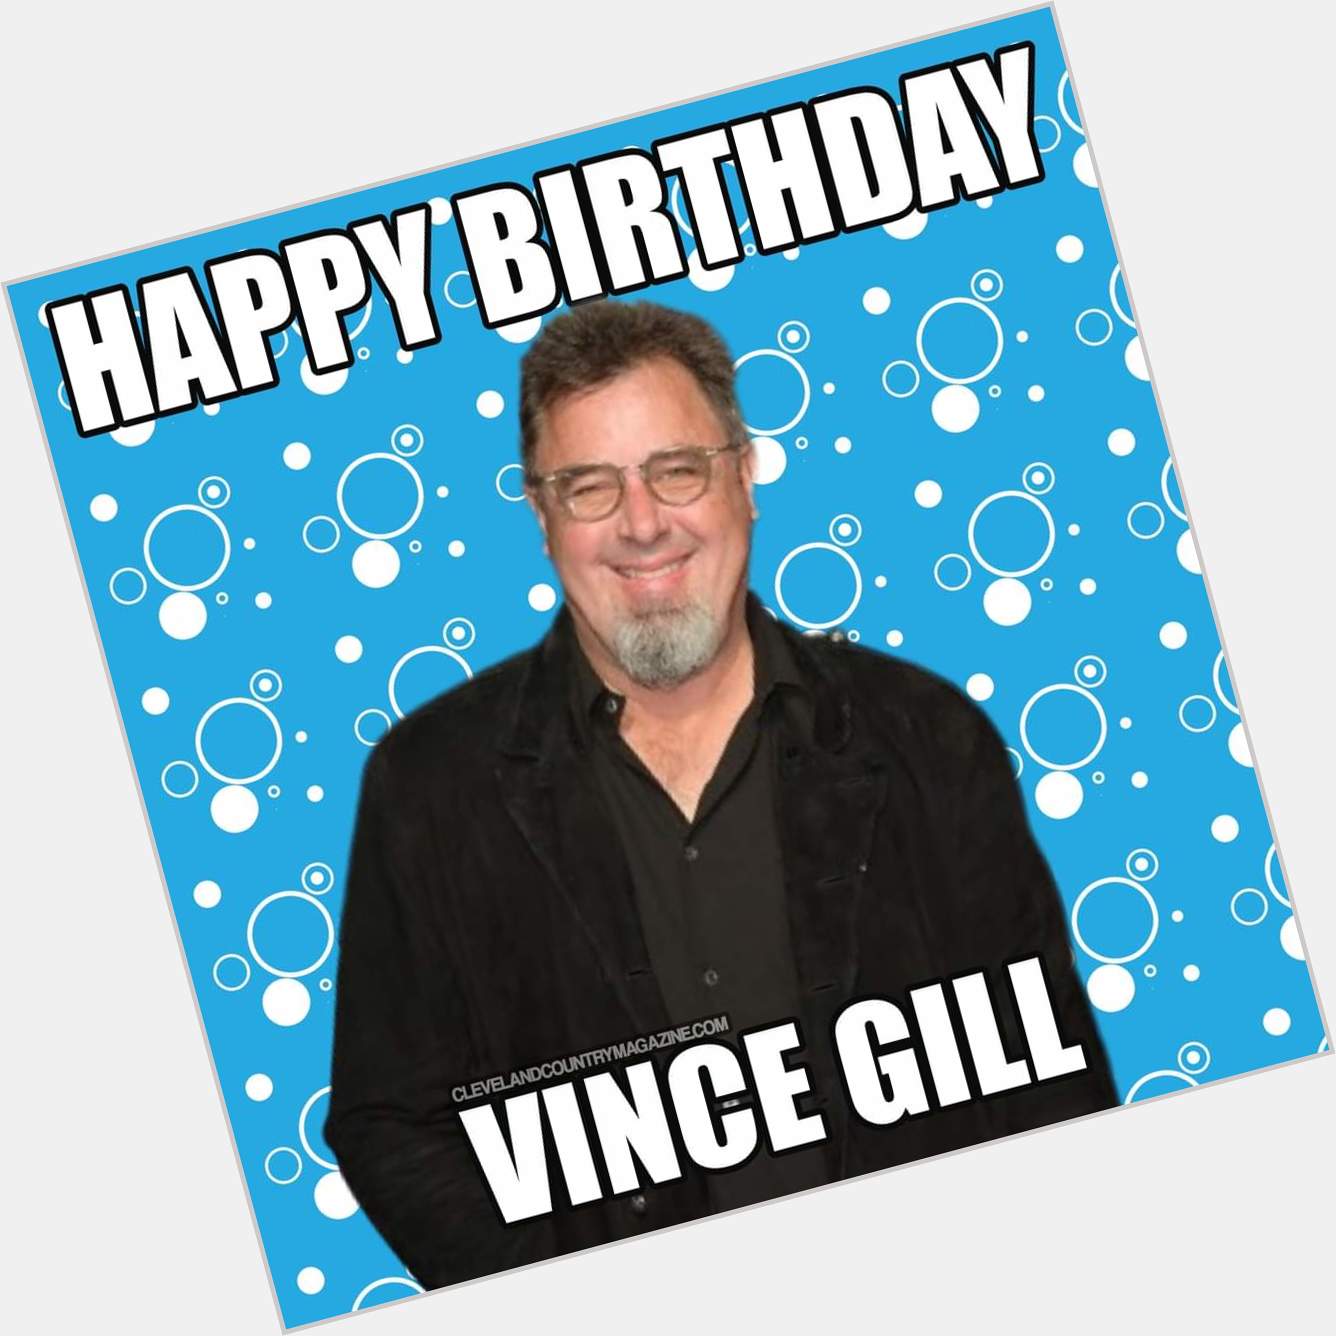 HAPPY BIRTHDAY VINCE GILL
Born on this day in 1957 in Norman, Oklahoma, was Vince Gill. 